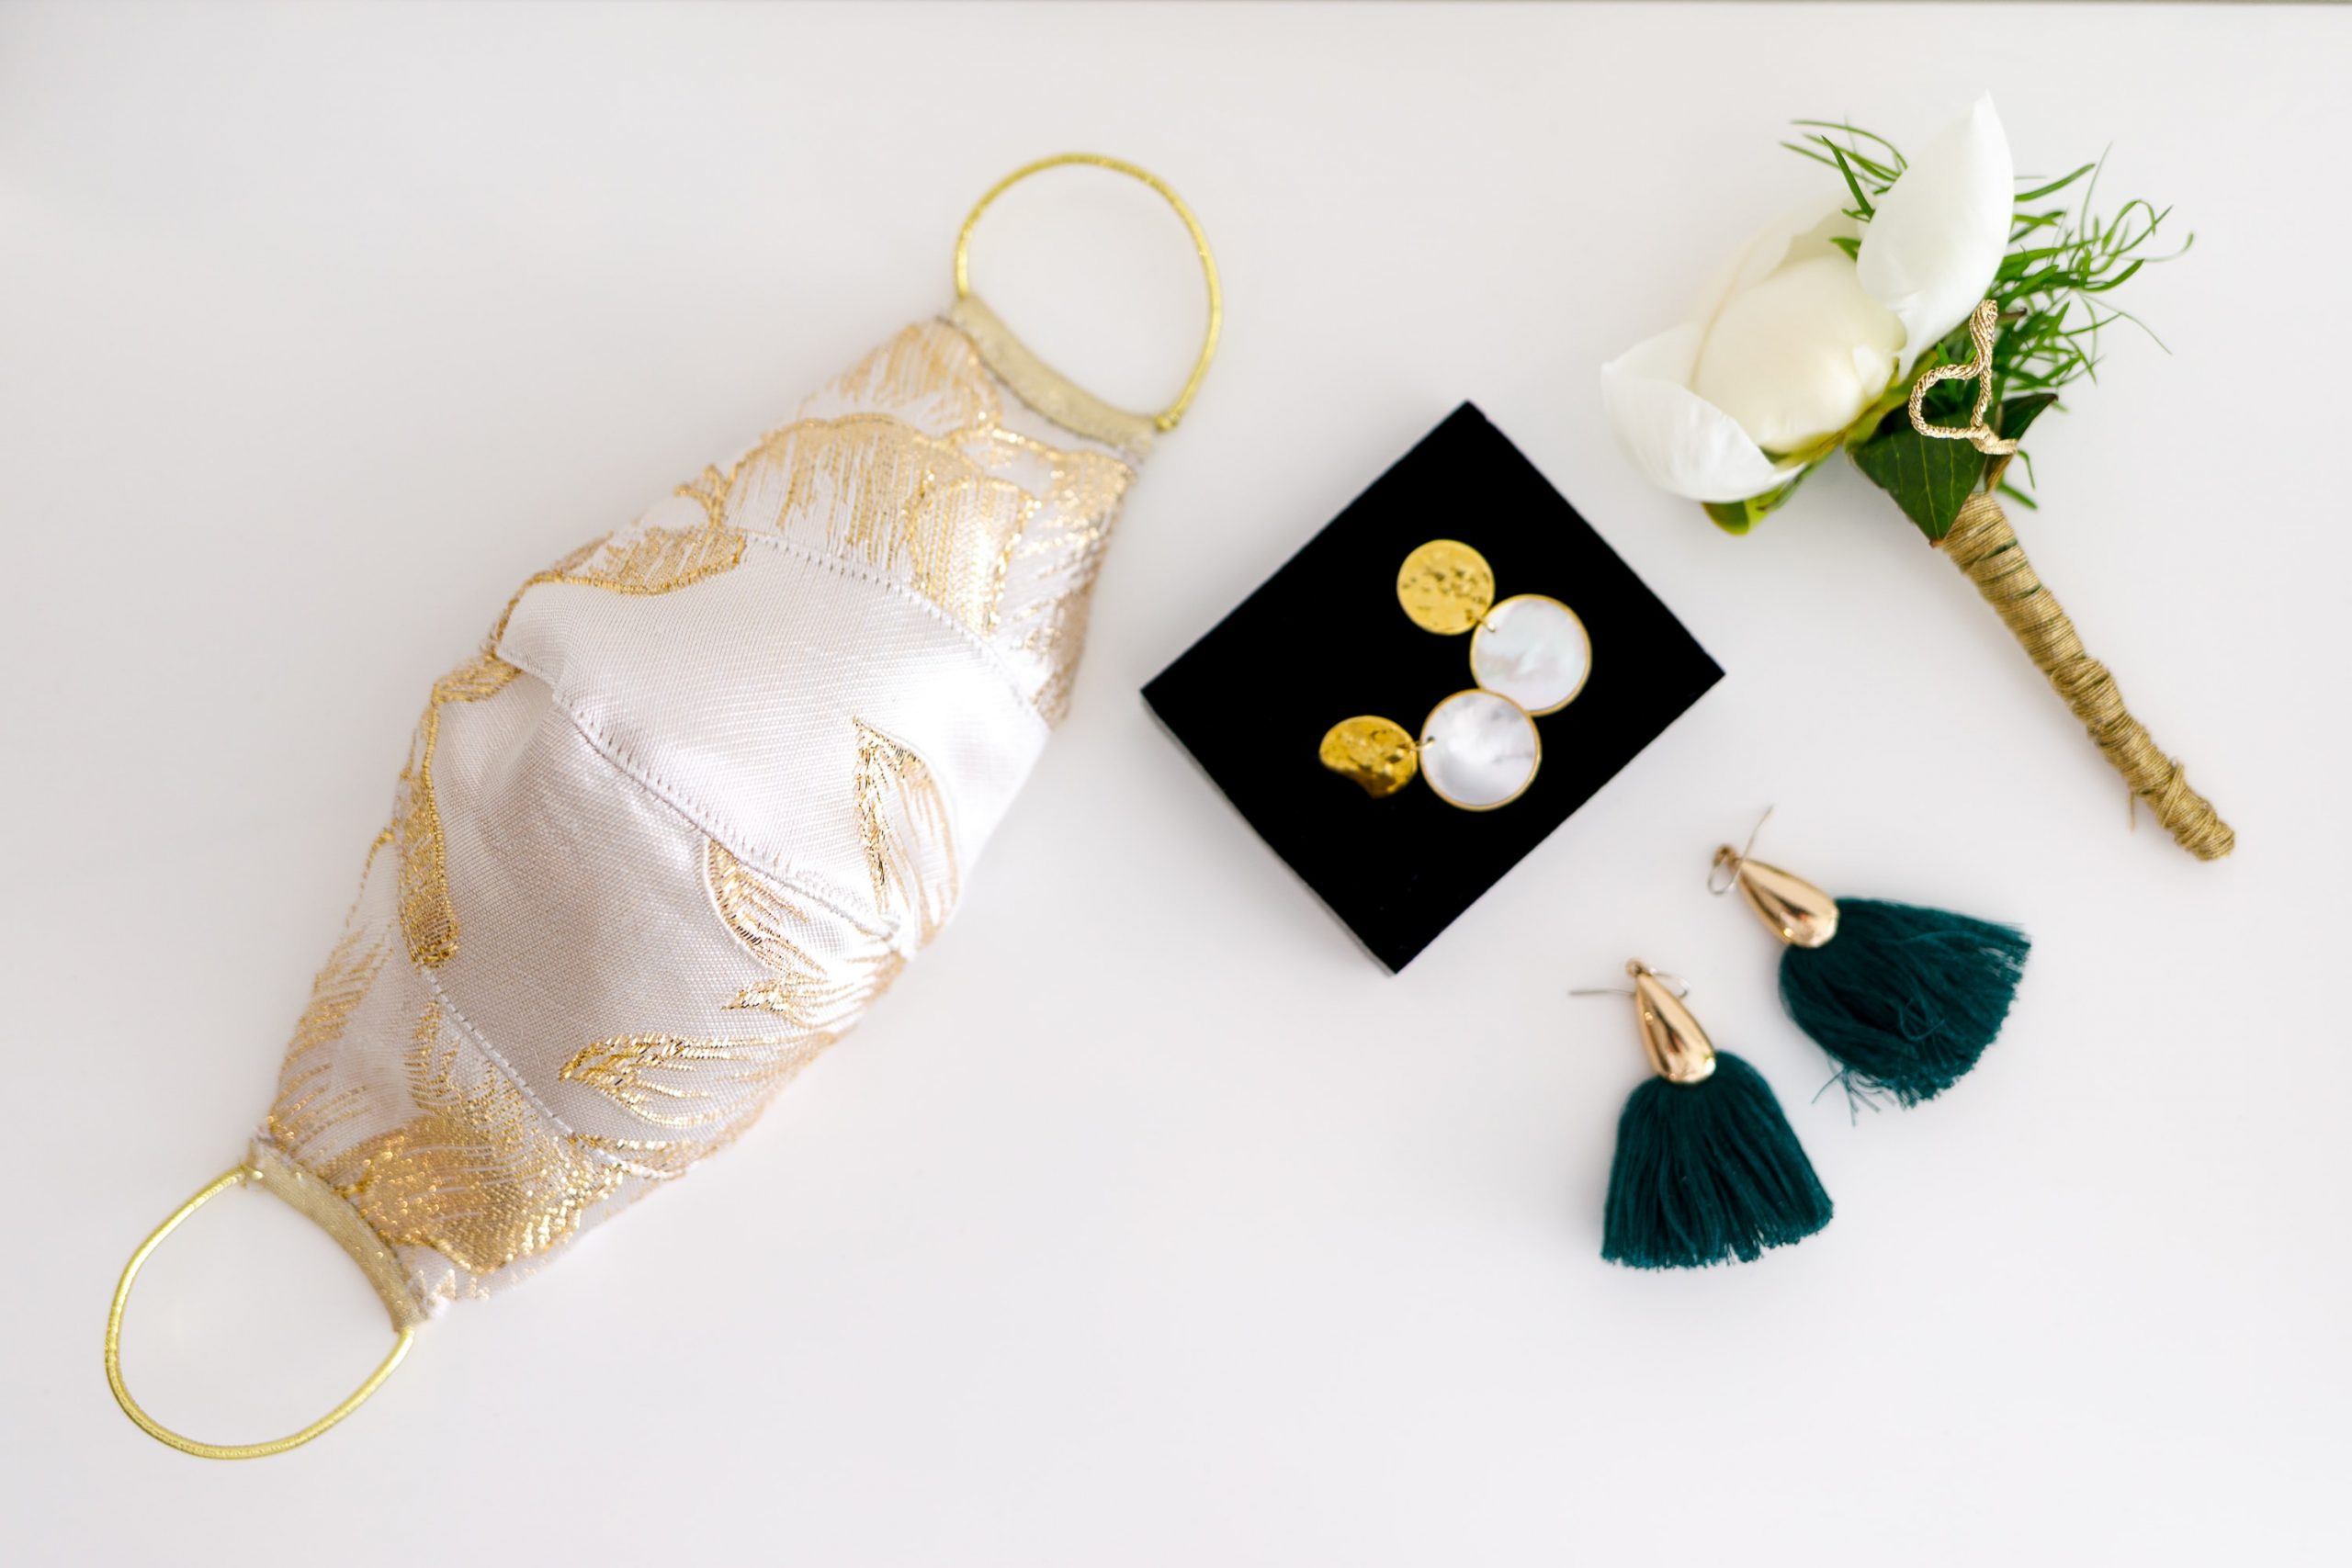 A bridal photo with an elegantly embroided white facemask layed out next to earrings and a boutonniere